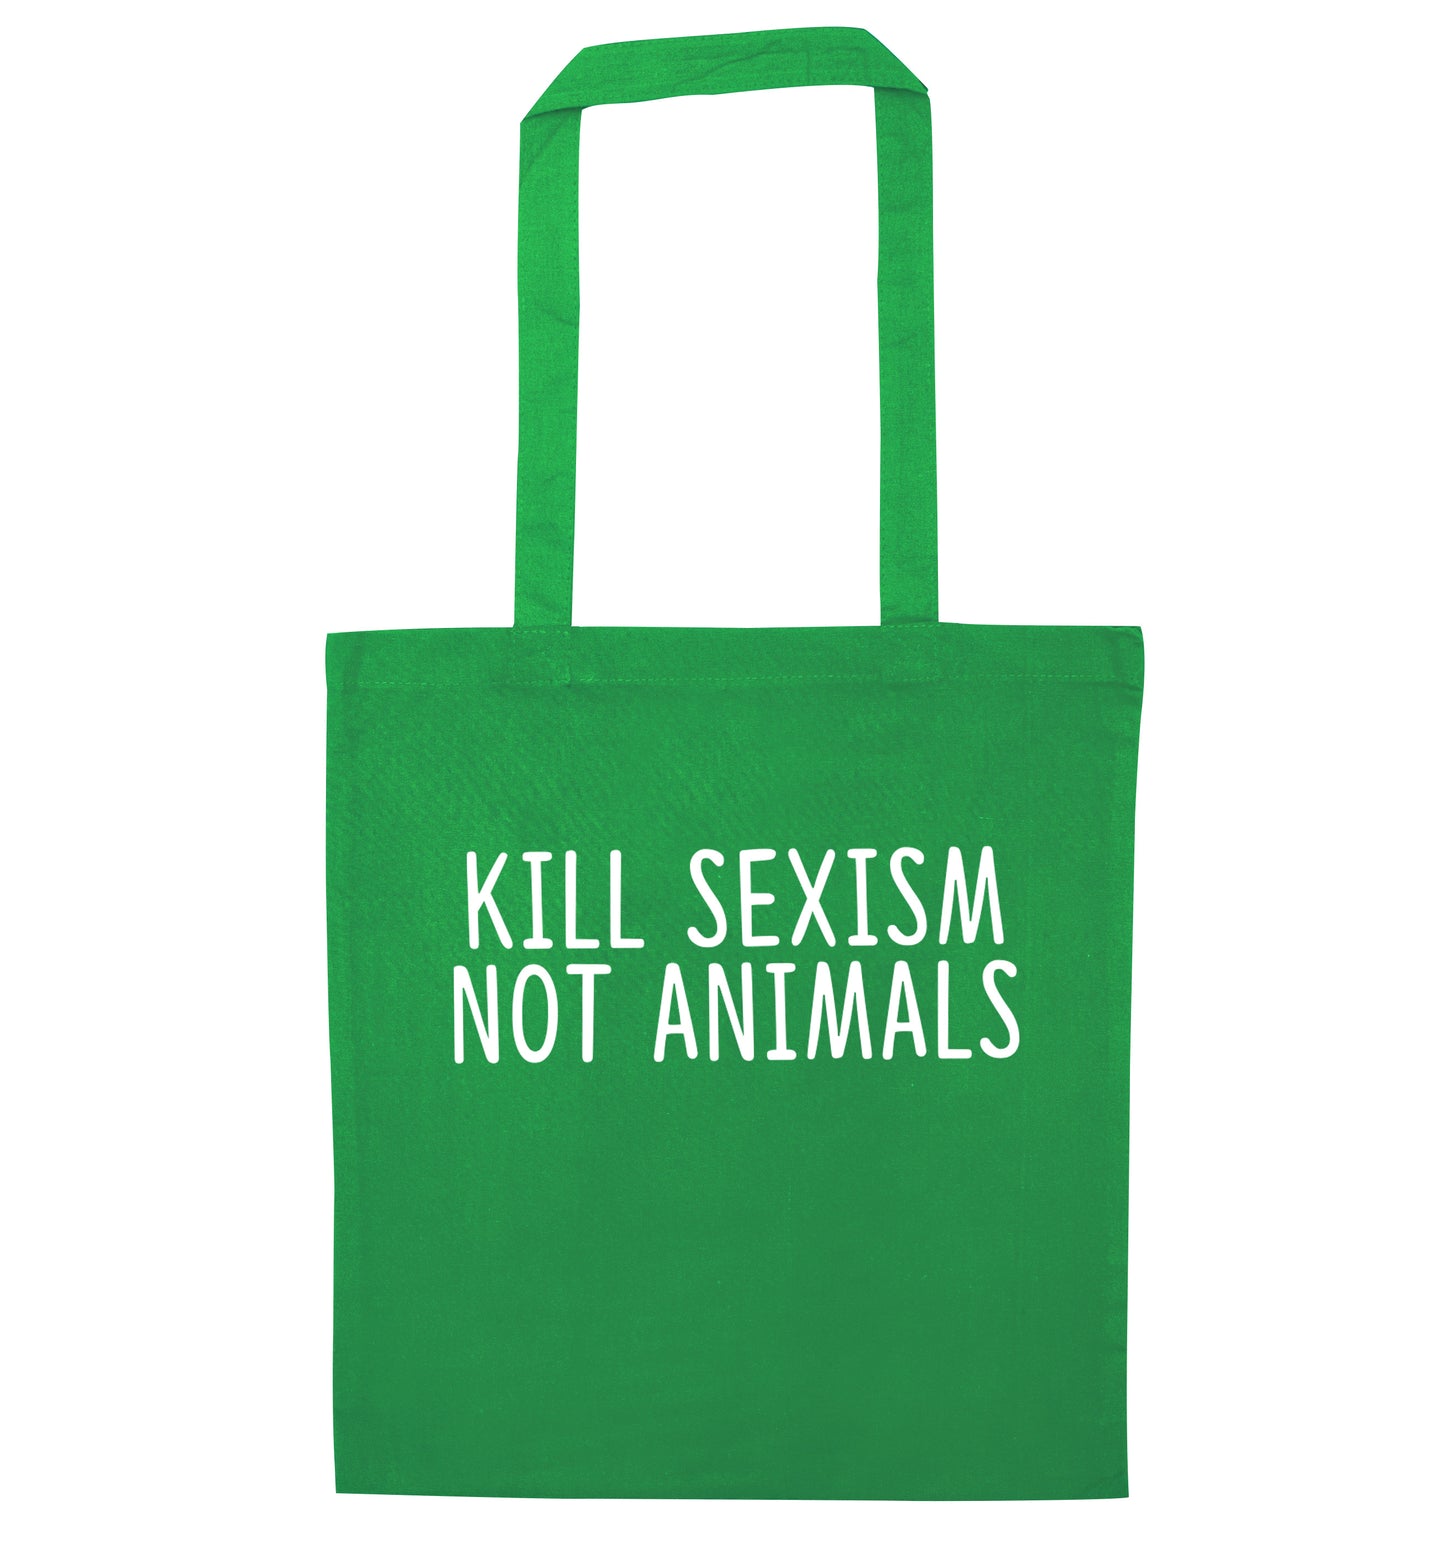 Kill Sexism Not Animals green tote bag